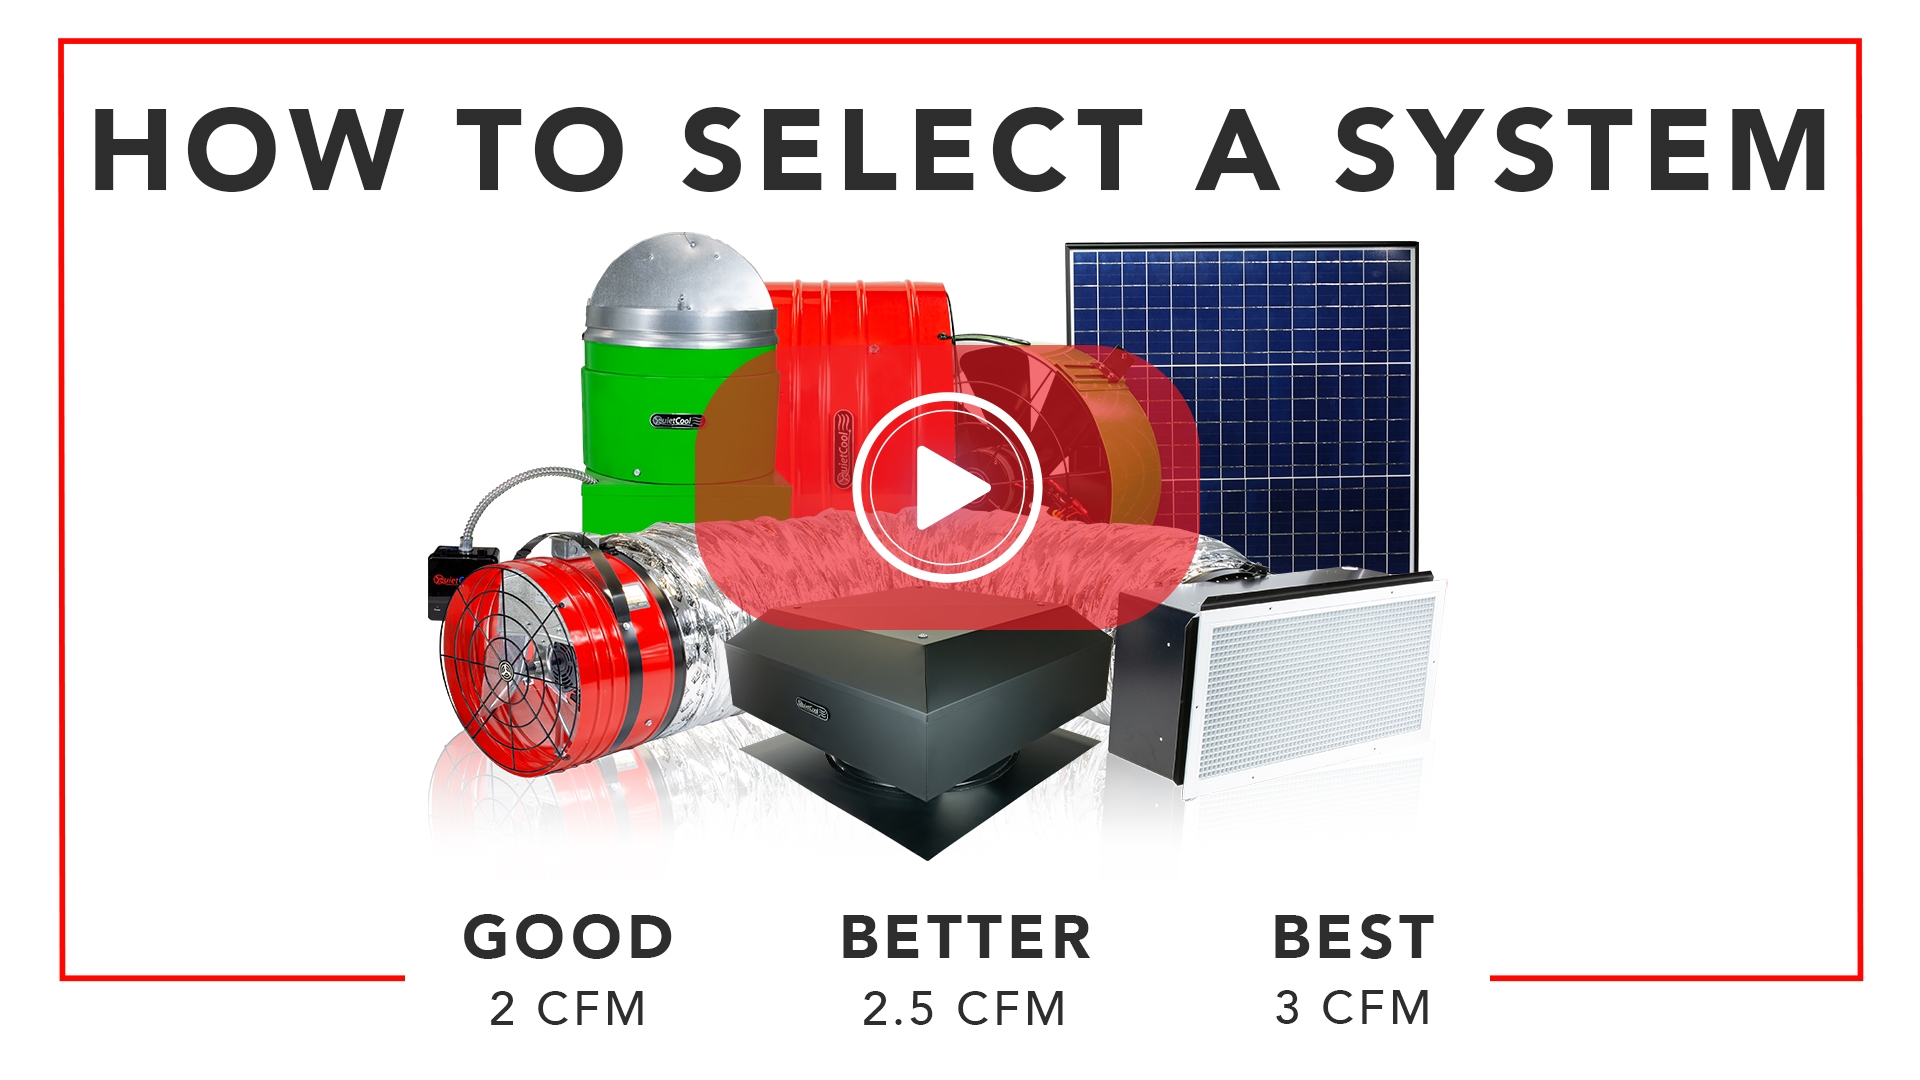 Selecting A System